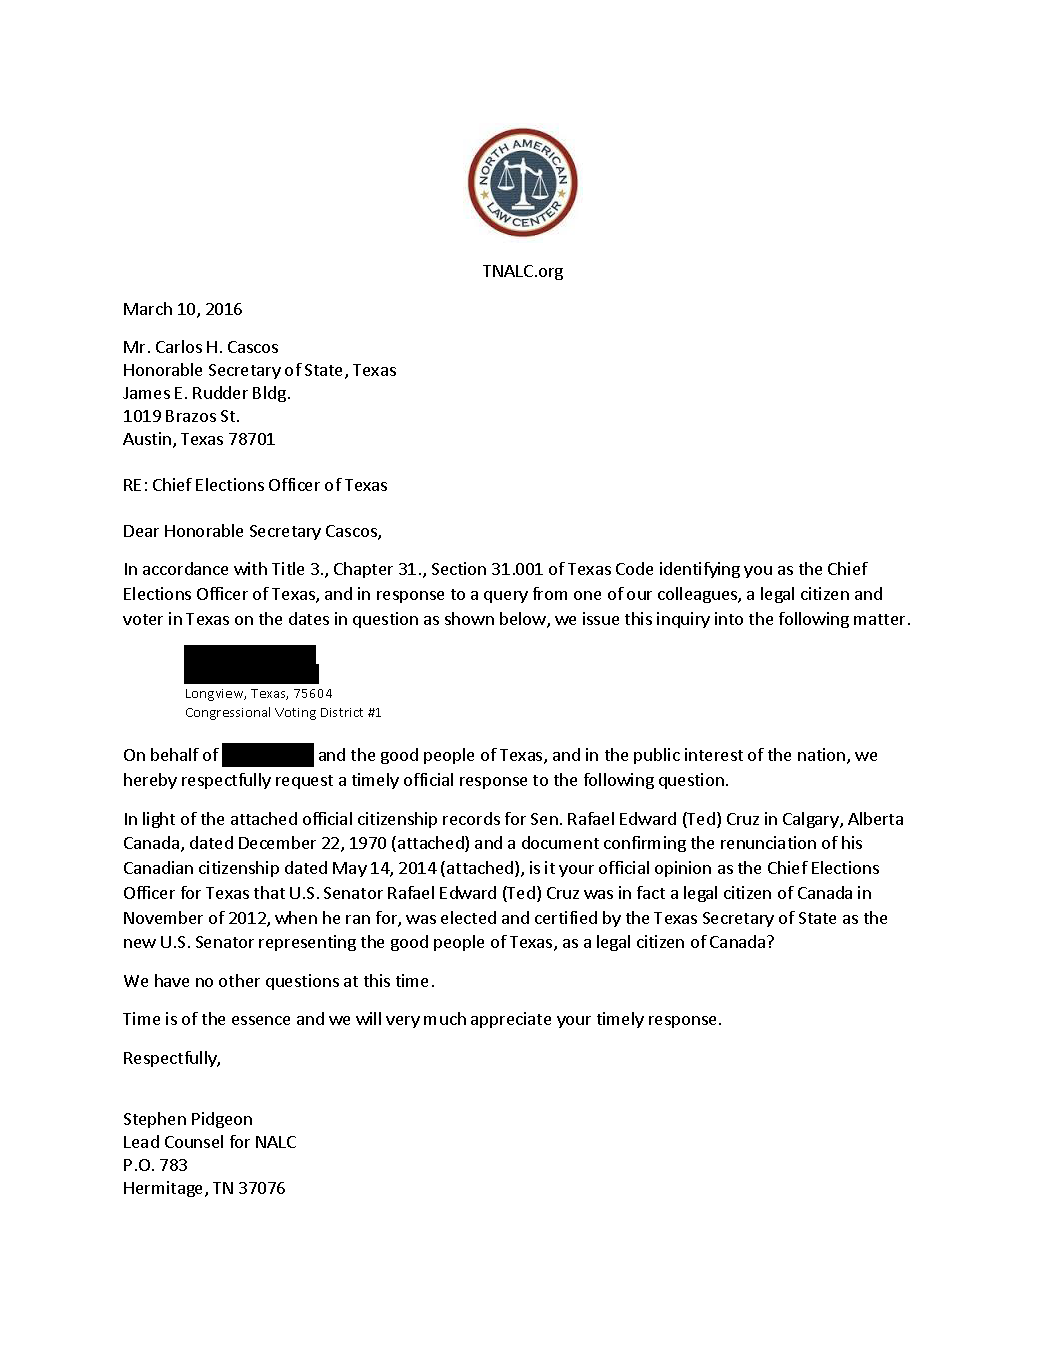 March 10 Letter to Texas SOS (redacted)_Page_1